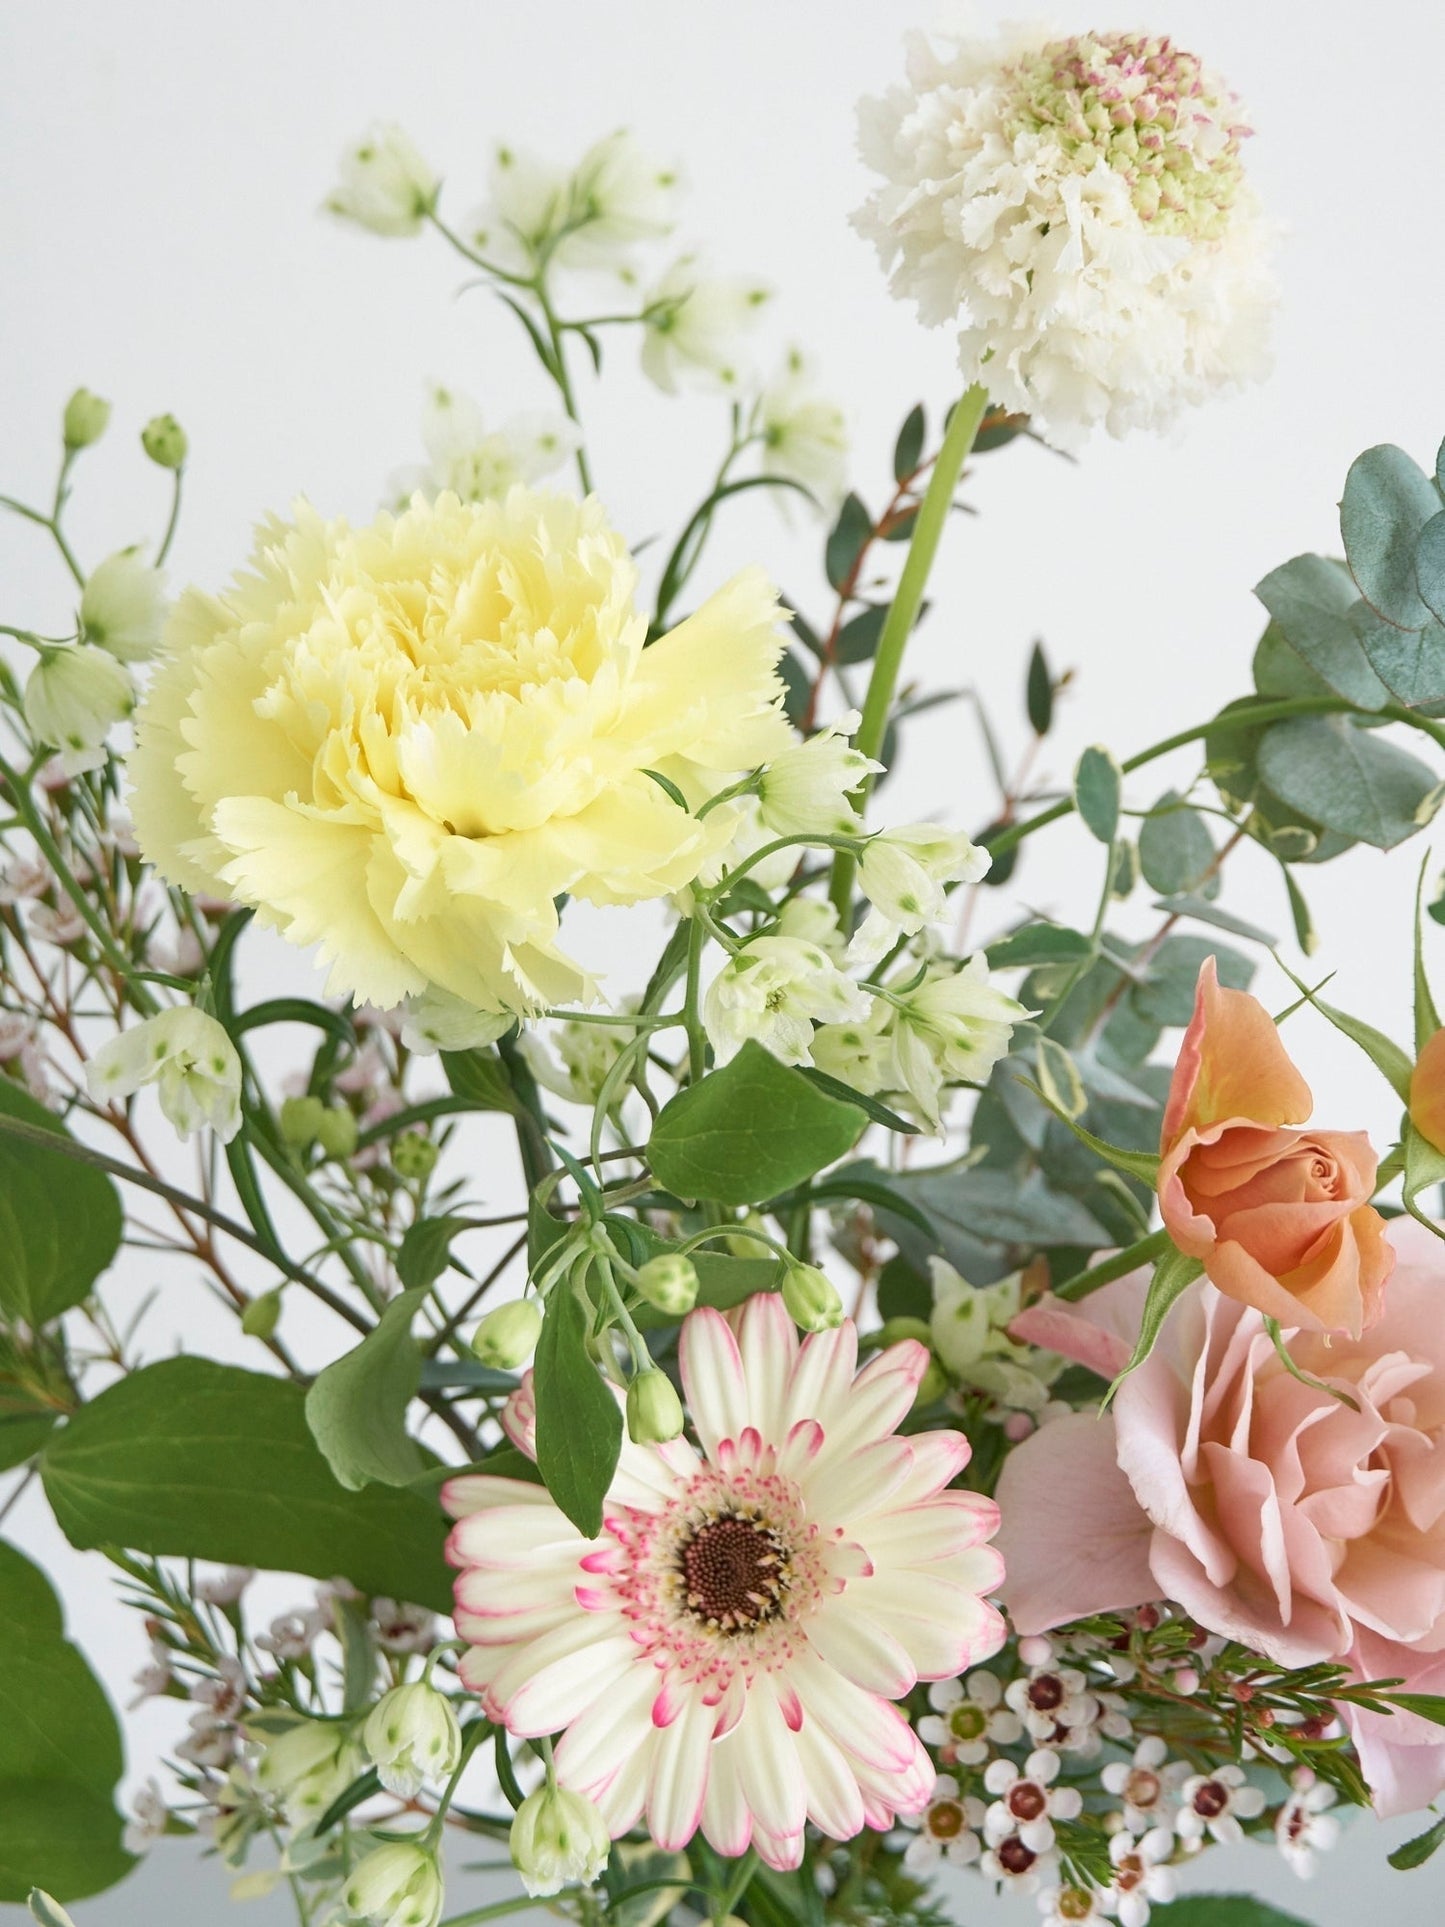 【mother's day】Set of bouquet S and clear vase 【Delivery date: 5/12 (Sun)】